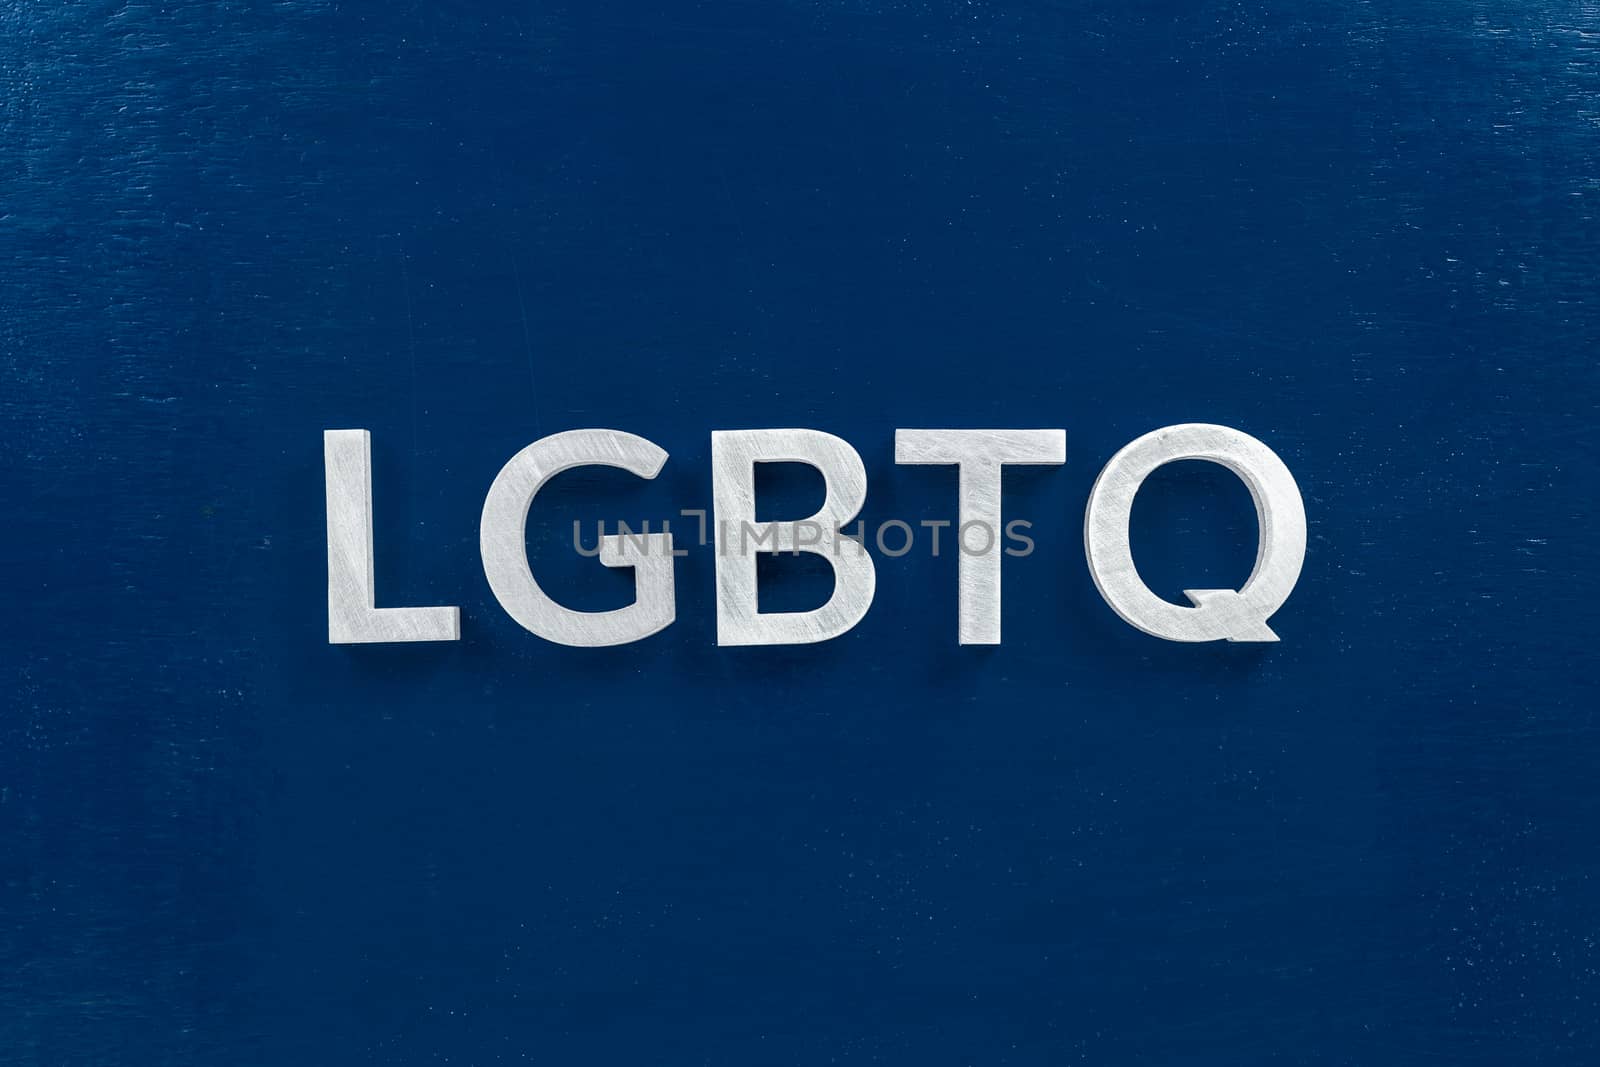 the abbreviation lgbtq - lesbian, gay, bisexual, transgendered, and queer laid with white letters on dark blue flat background - in center of picture, directly above view